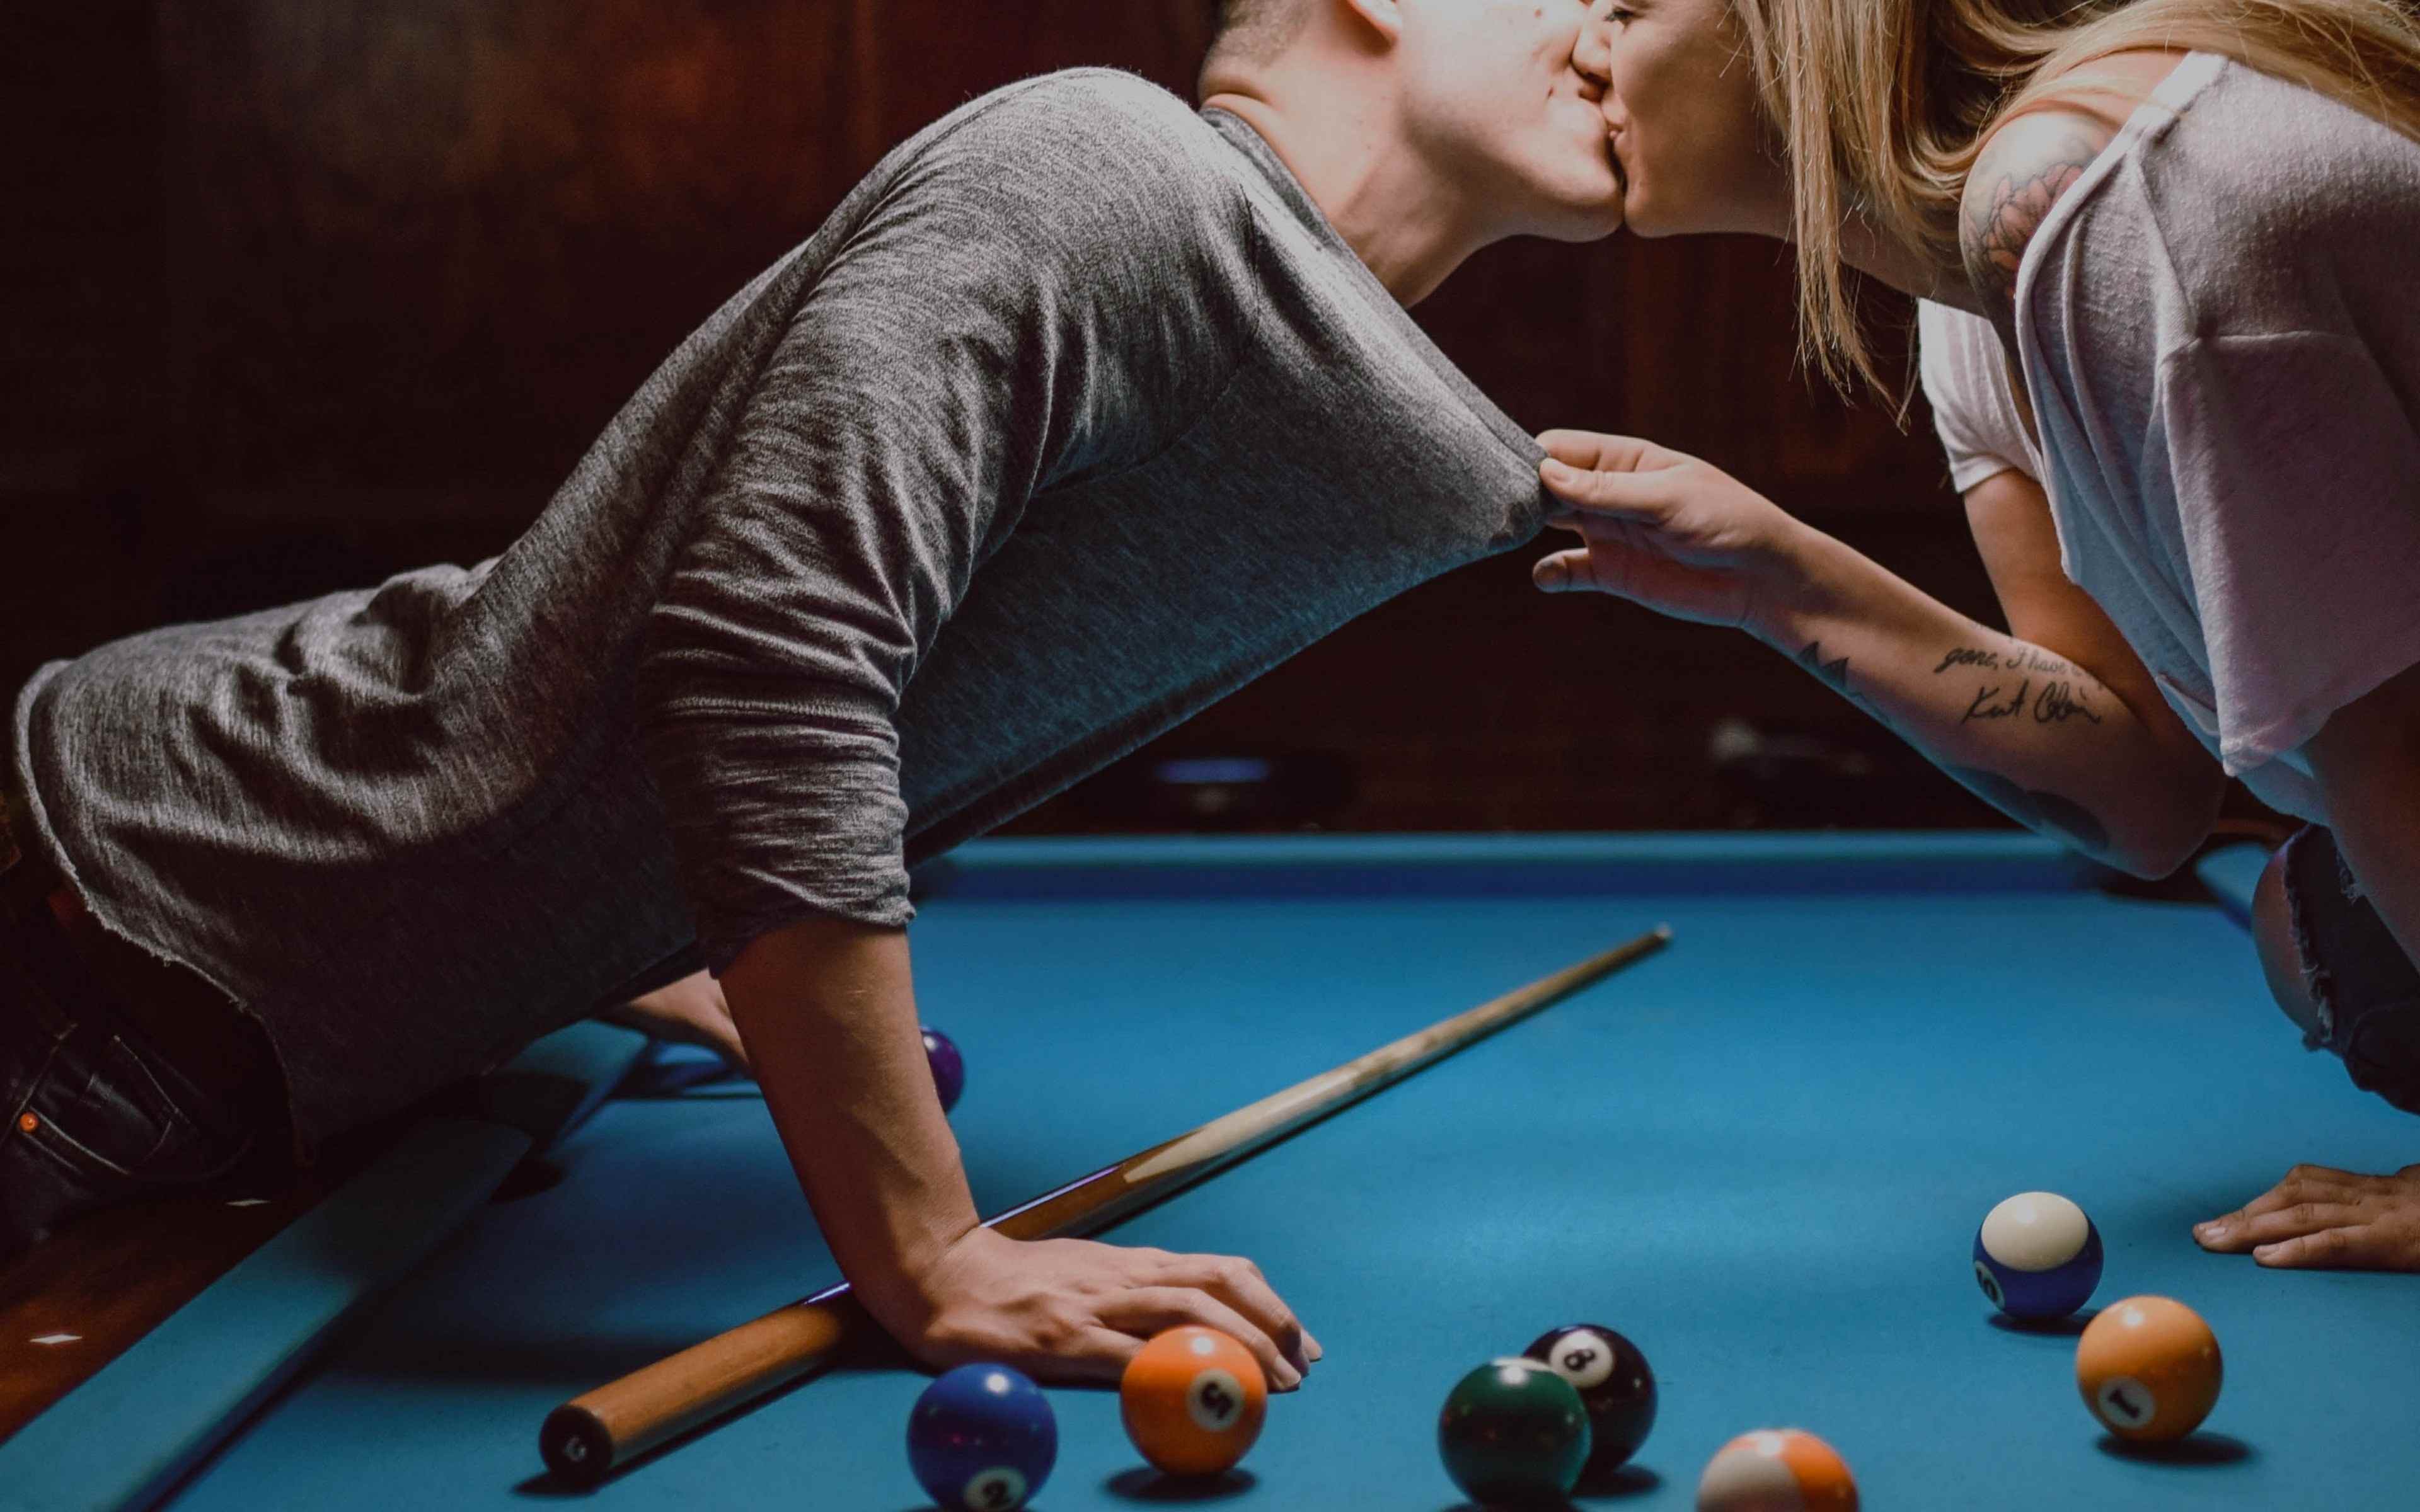 35 Fun And Romantic Games For Couples